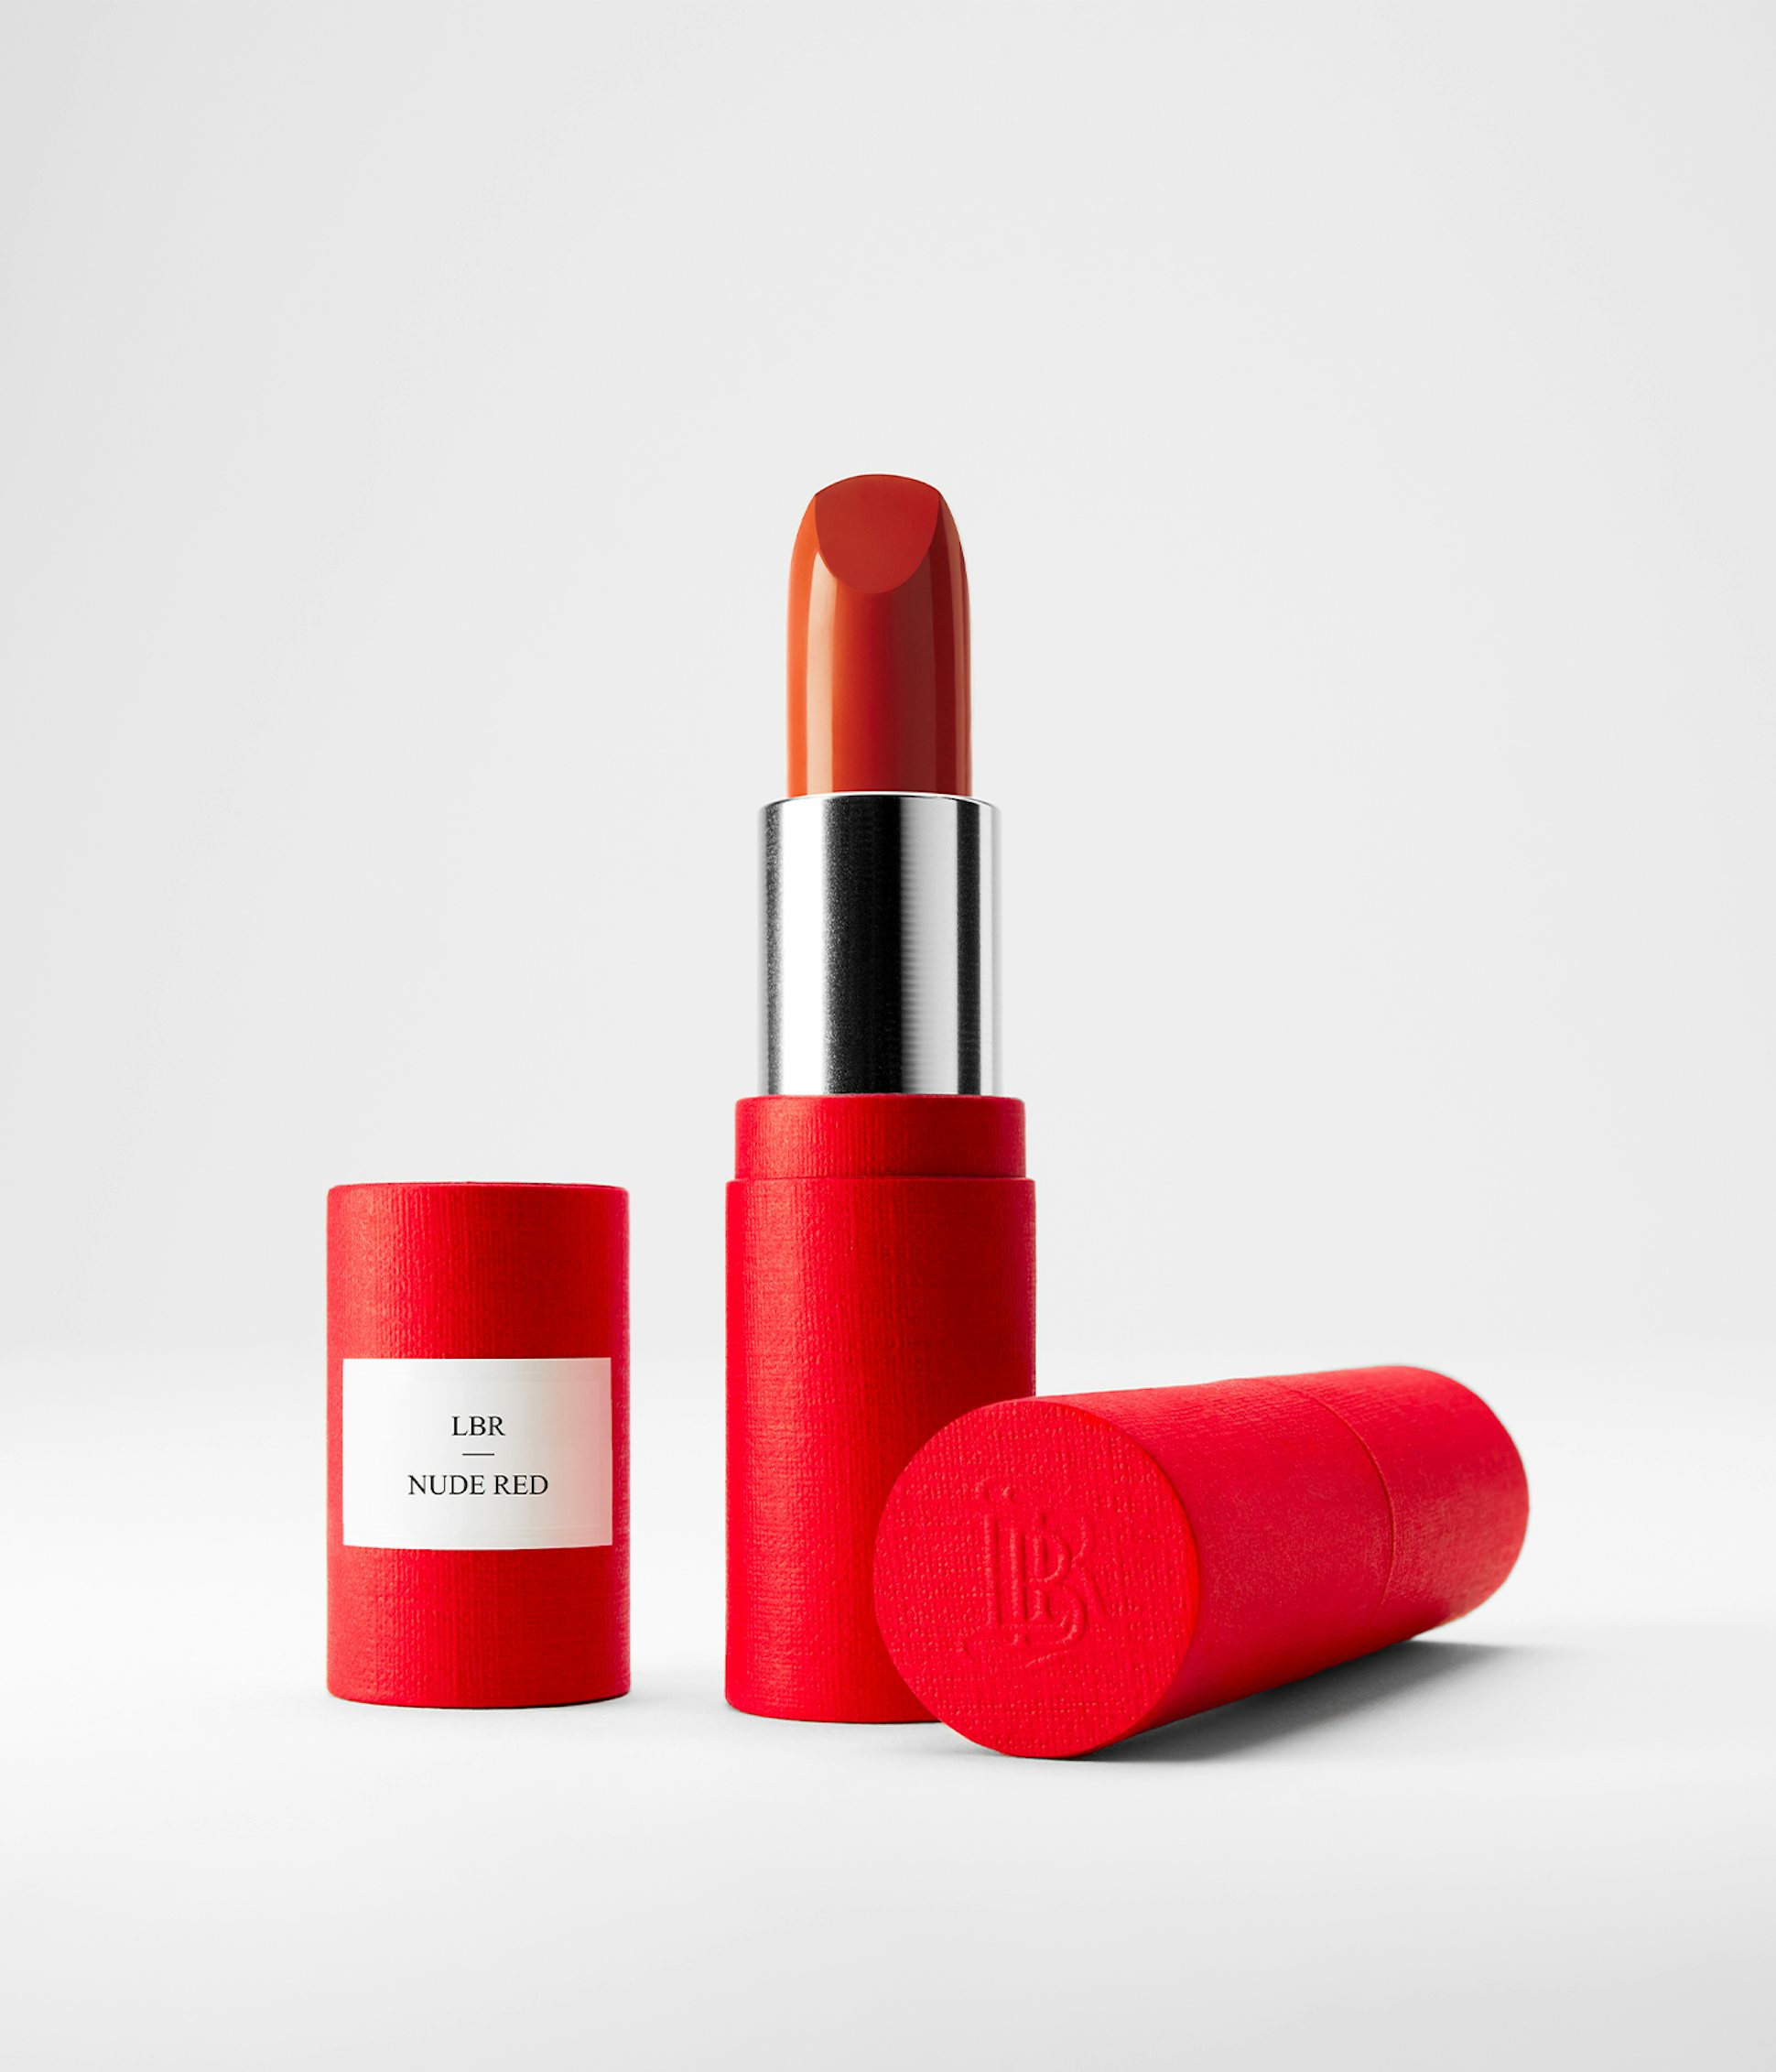 La bouche rouge Nude Red lipstick in the red paper case